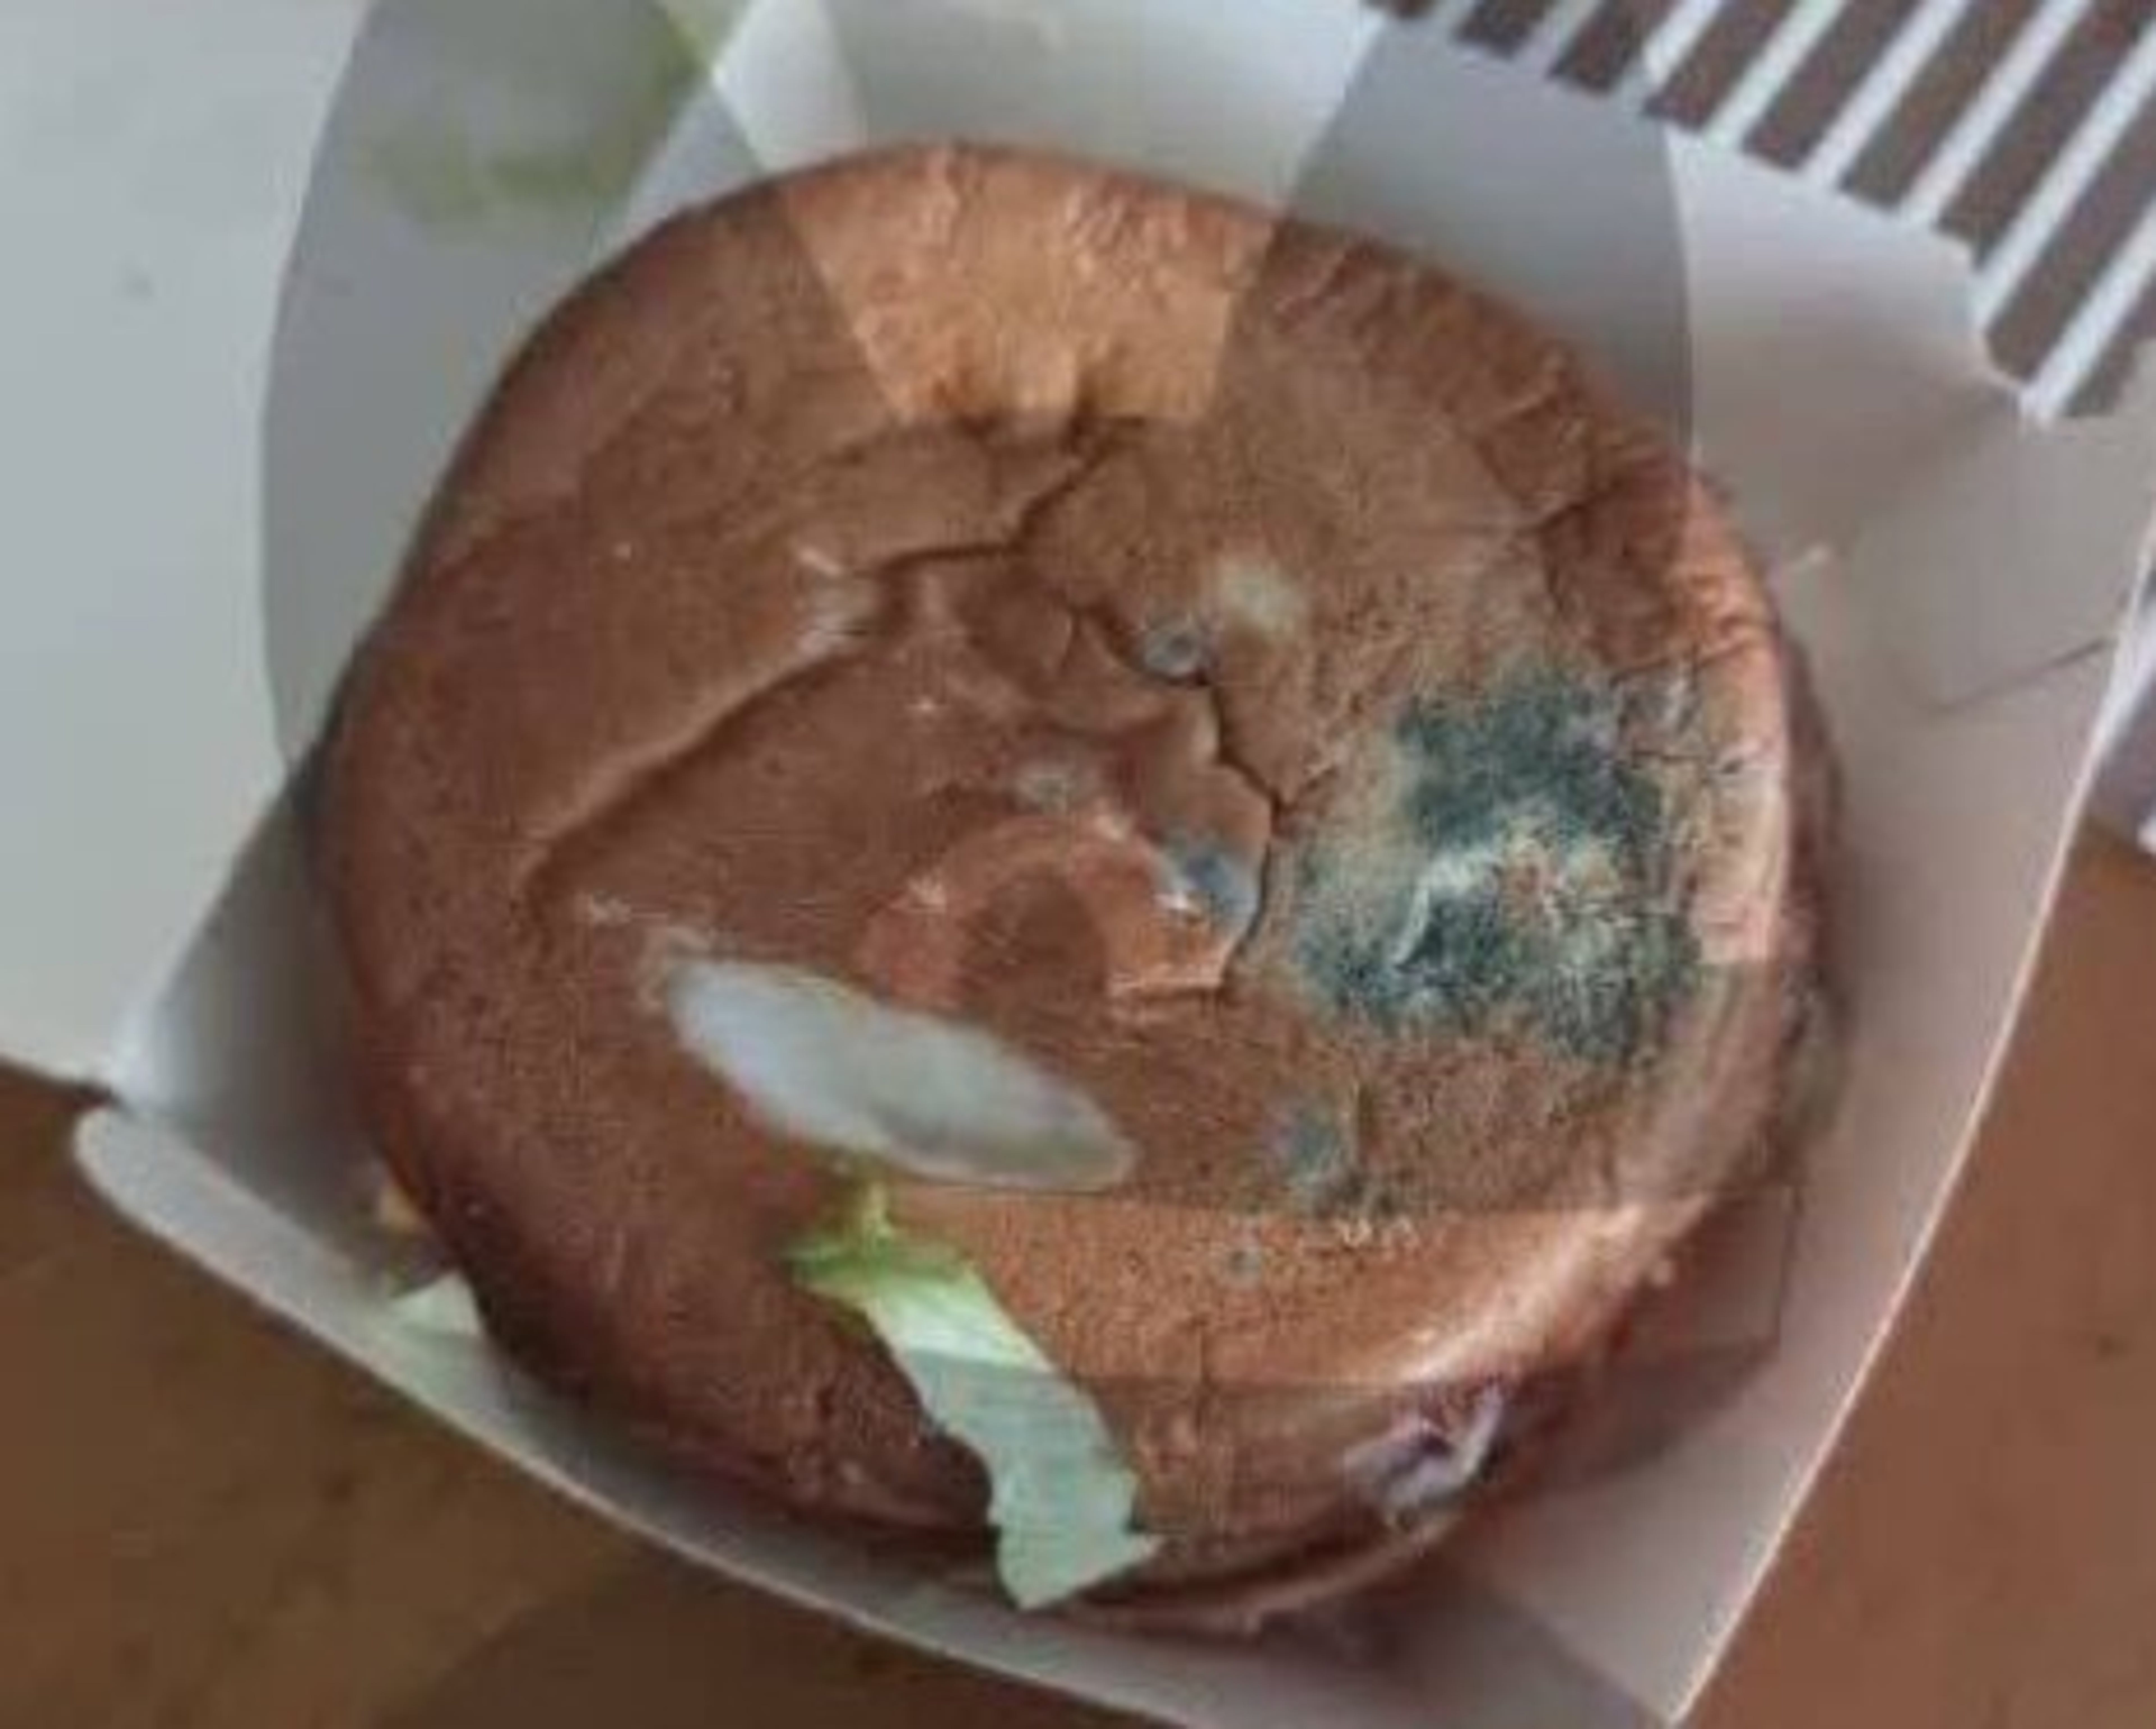 Russia&#39;s McDonald&#39;s Replacement Serves Moldy Buns And Insect Legs In The Meals: Report